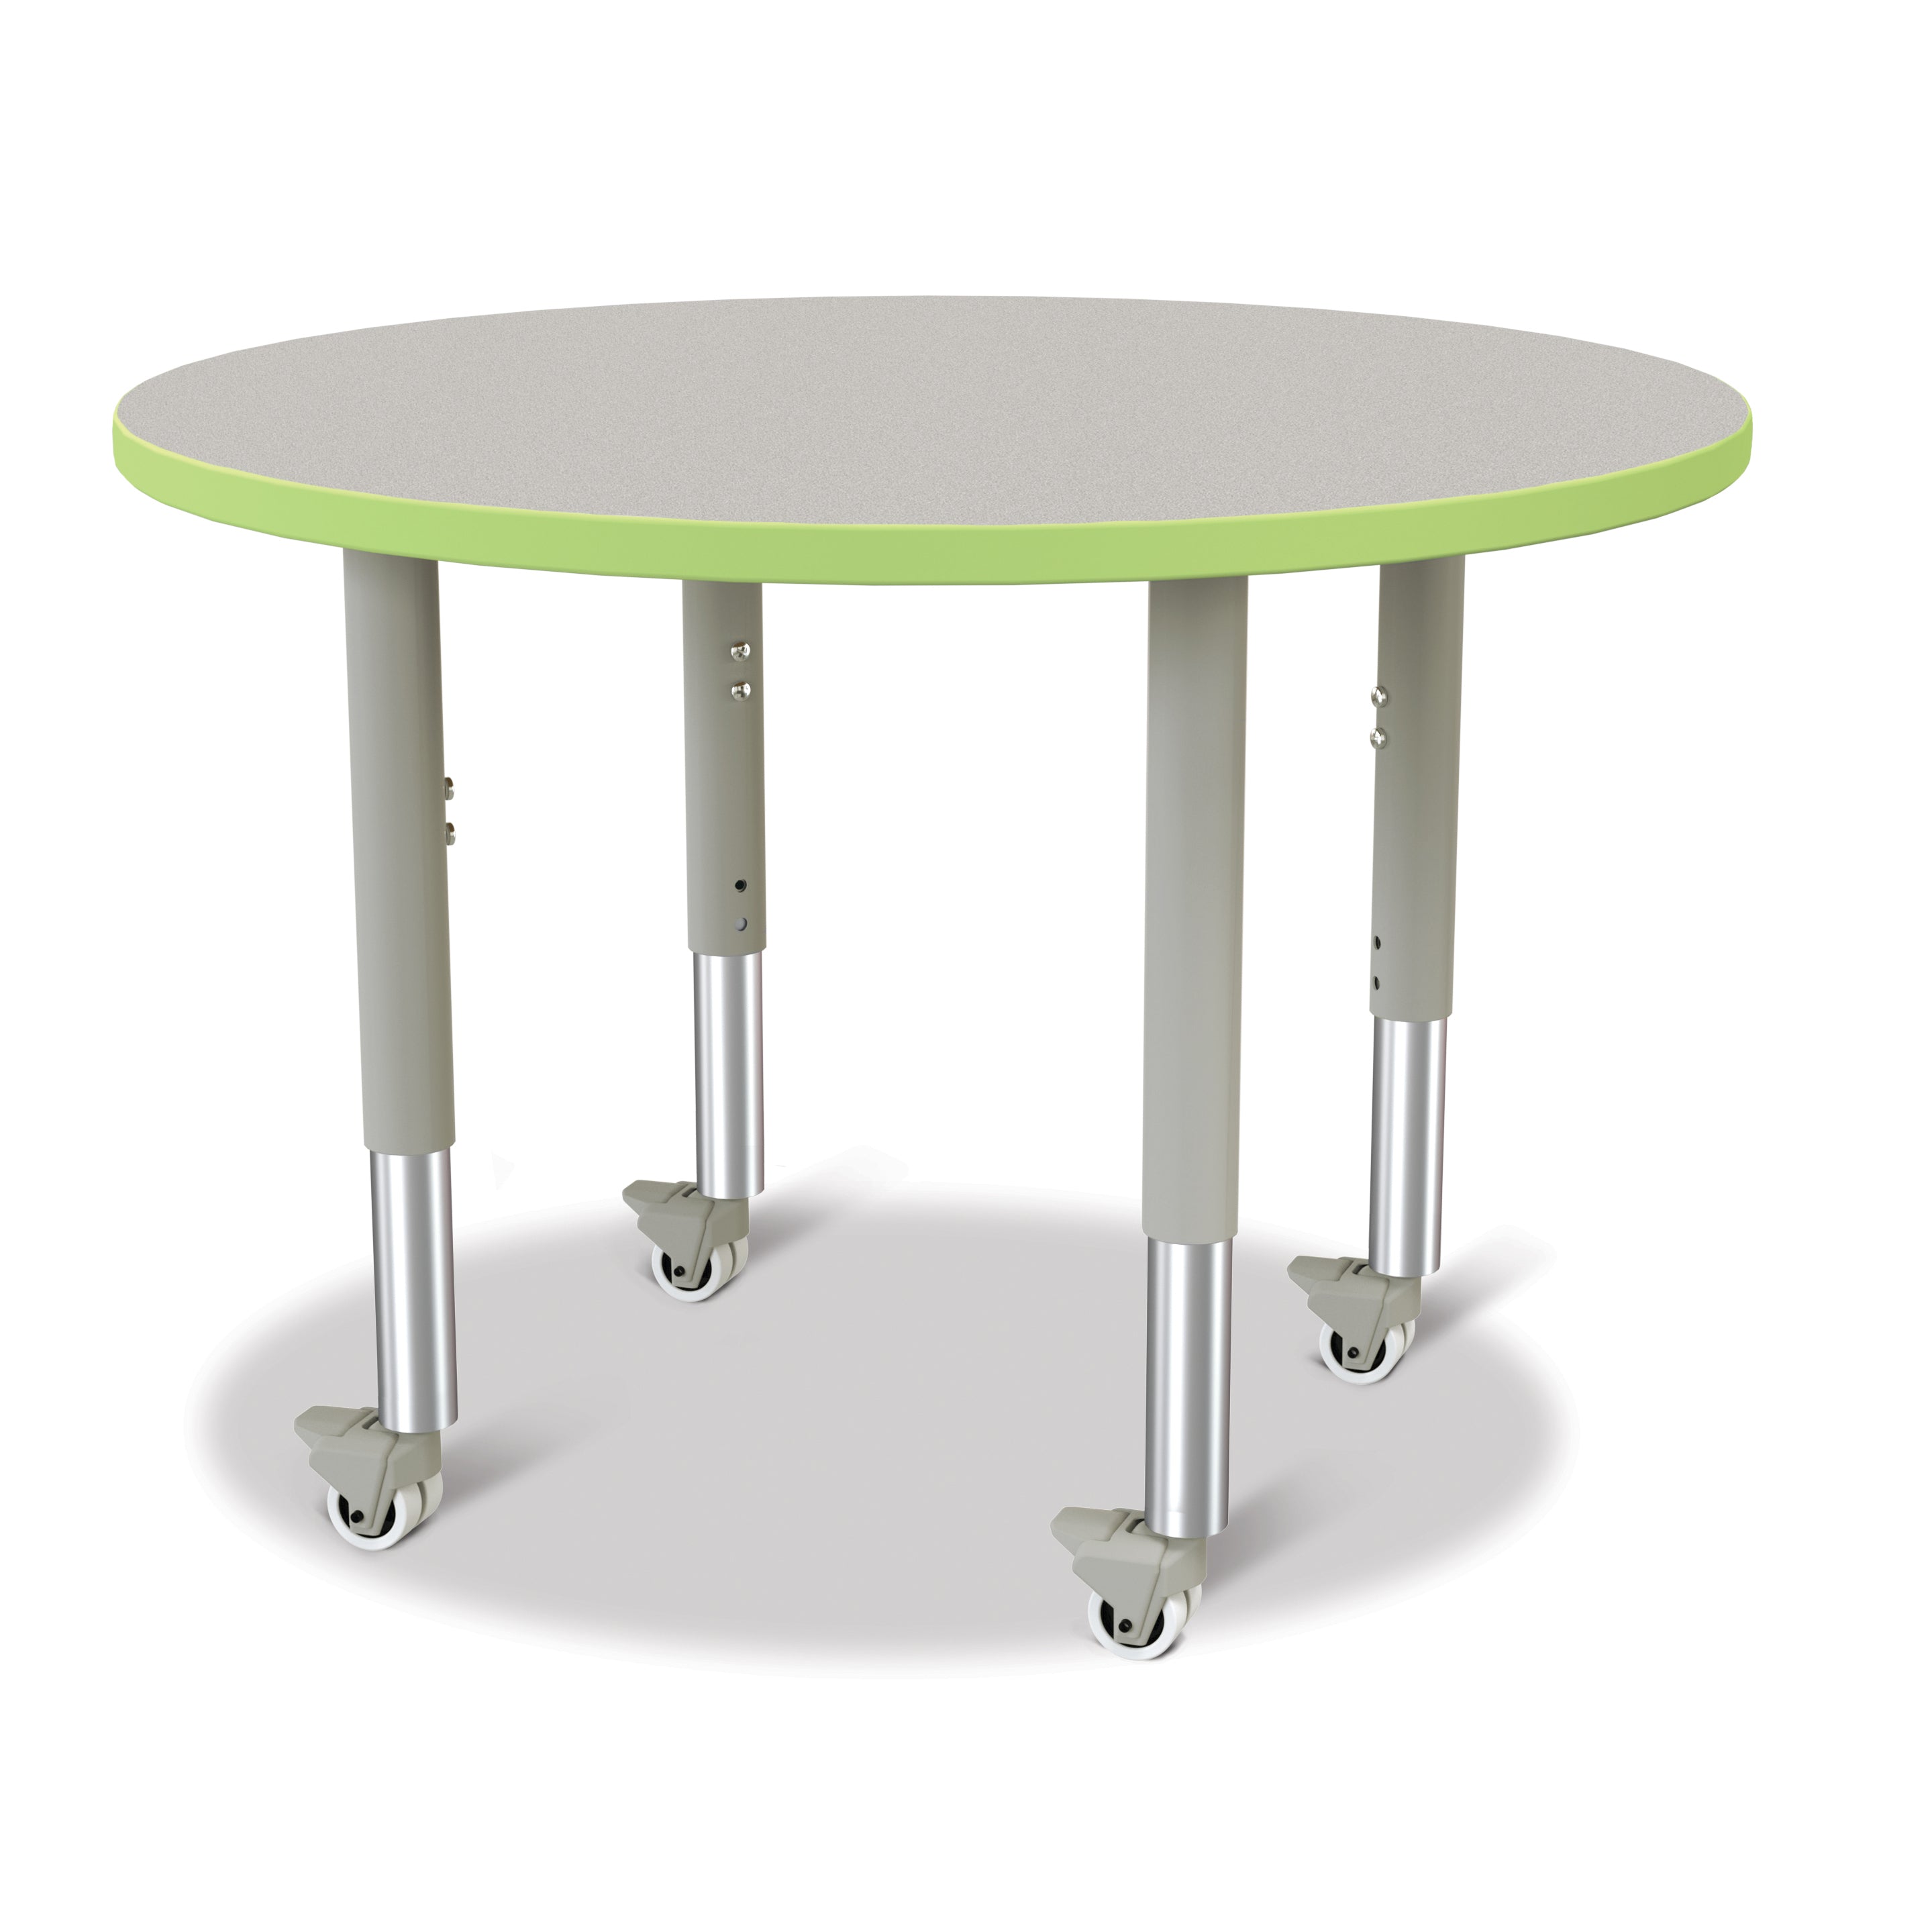 6488JCM130, Berries Round Activity Table - 36" Diameter, Mobile - Freckled Gray/Key Lime/Gray